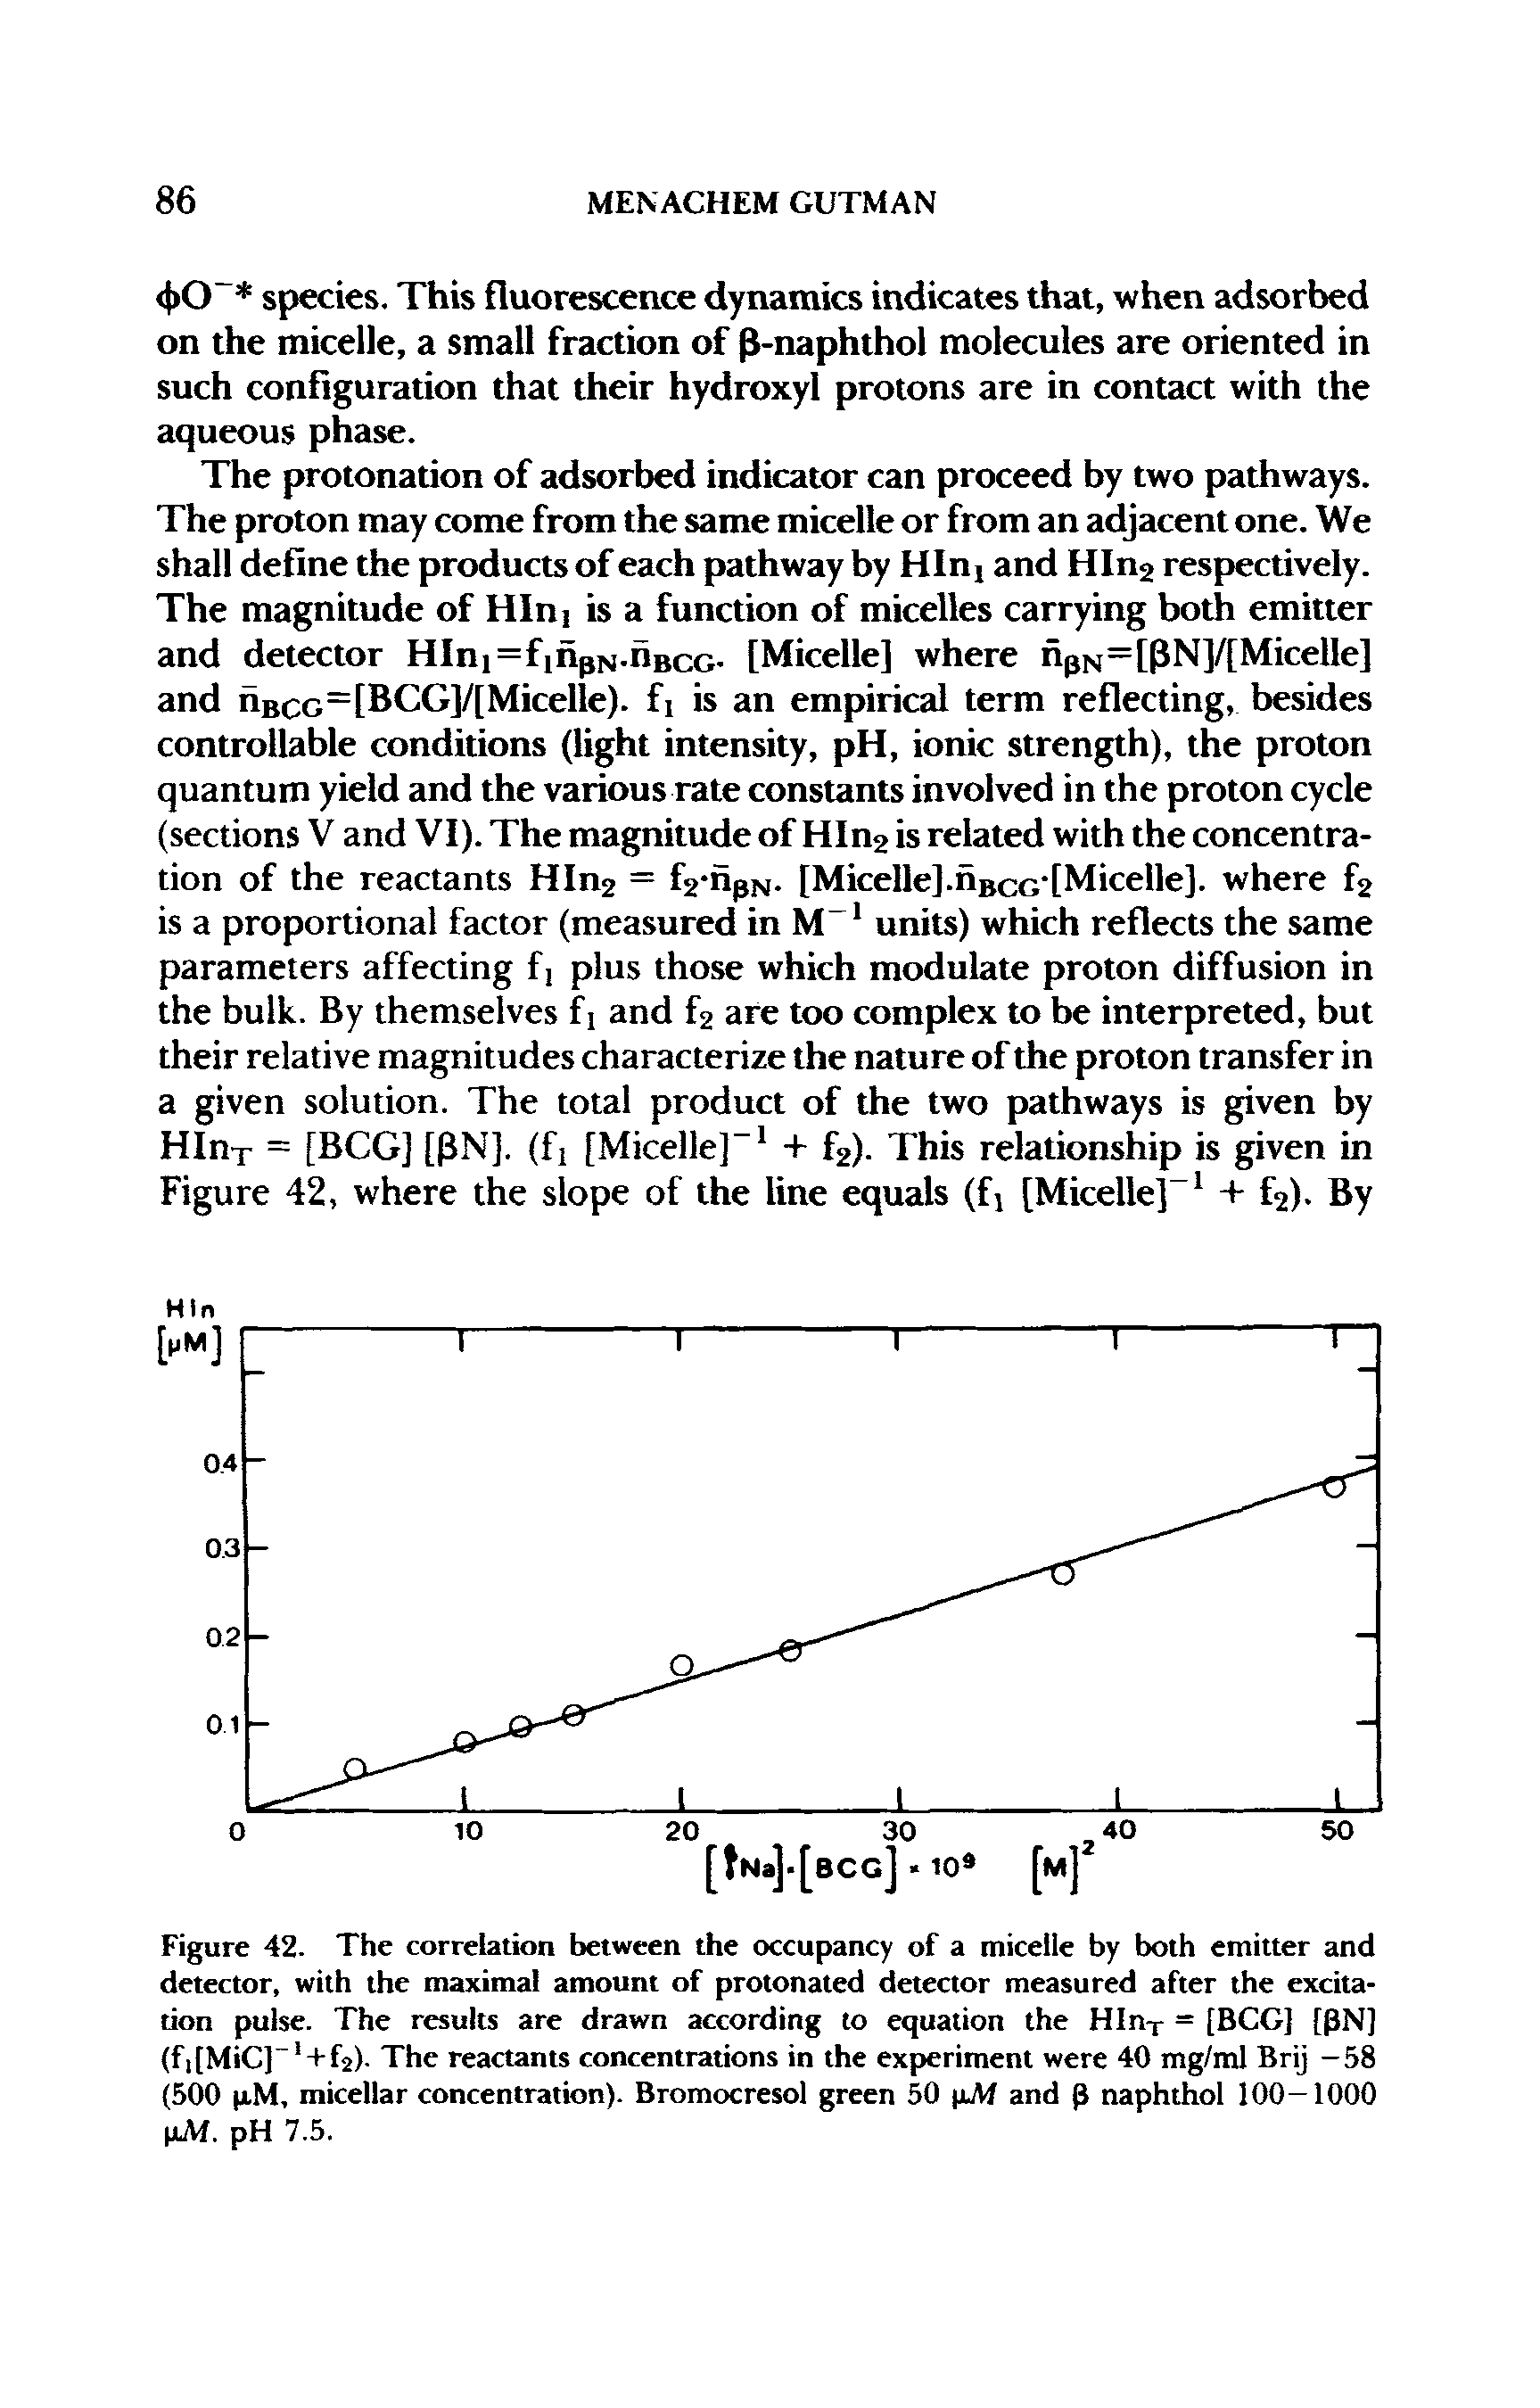 Figure 42. The correlation between the occupancy of a micelle by both emitter and detector, with the maximal amount of protonated detector measured after the excitation pulse. The results are drawn according to equation the HInT = [BCG] [PN] (fi[MiC] + f2)- The reactants concentrations in the experiment were 40 mg/ml Brij -58 (500 p.M, micellar concentration). Bromocresol green 50 (lAf and (J naphthol 100—1000 pJW. pH 7.5.